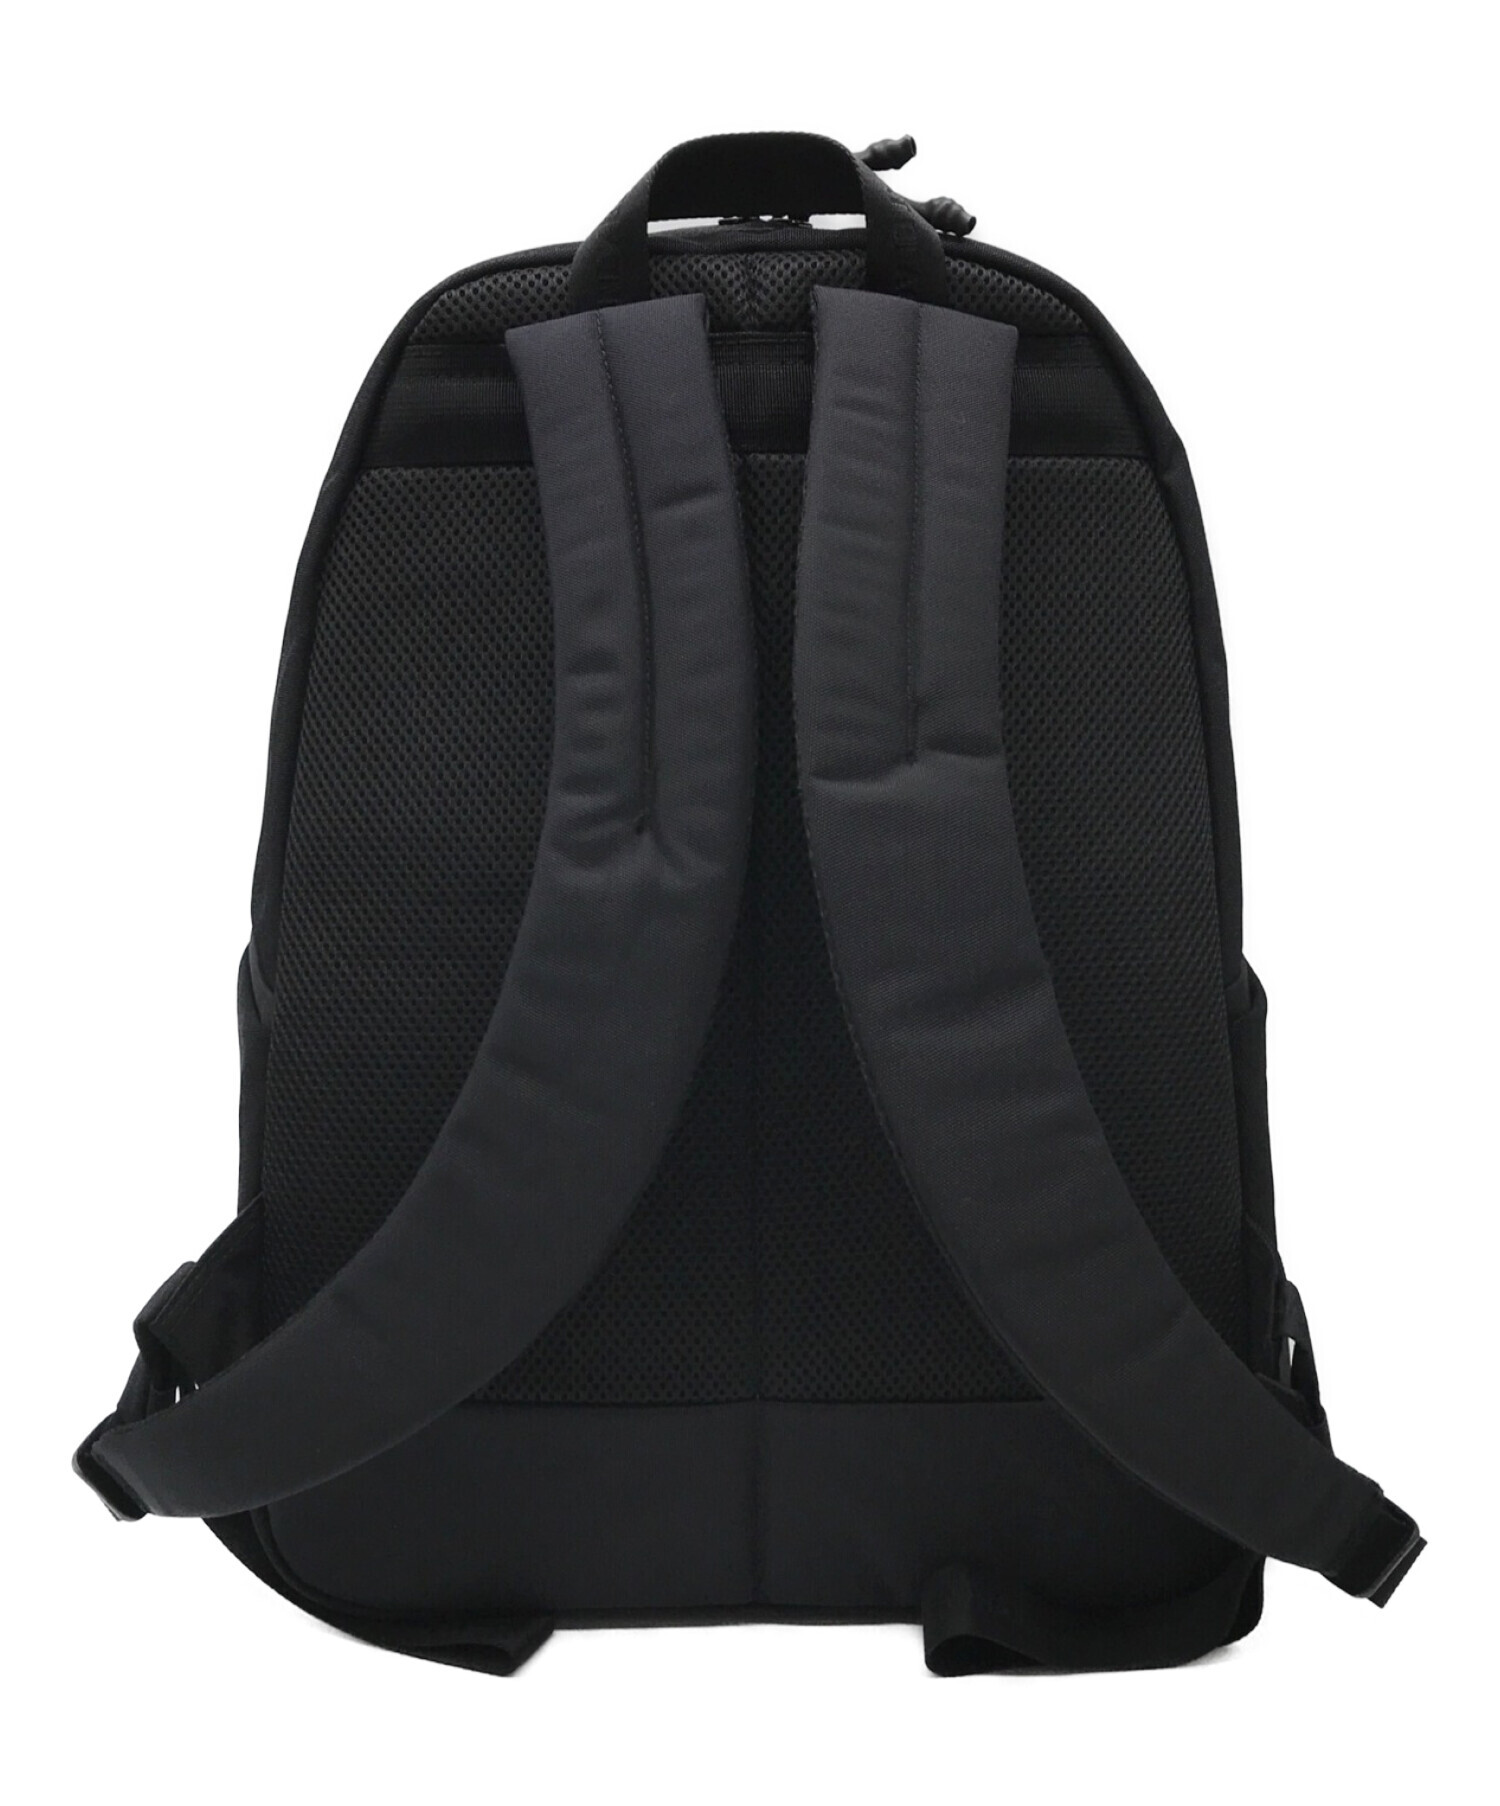 BRIEFING (ブリーフィング) WHITE MOUNTAINEERING (ホワイトマウンテ二アニング) X-PAC BACK PACK  ブラック サイズ:下記参照